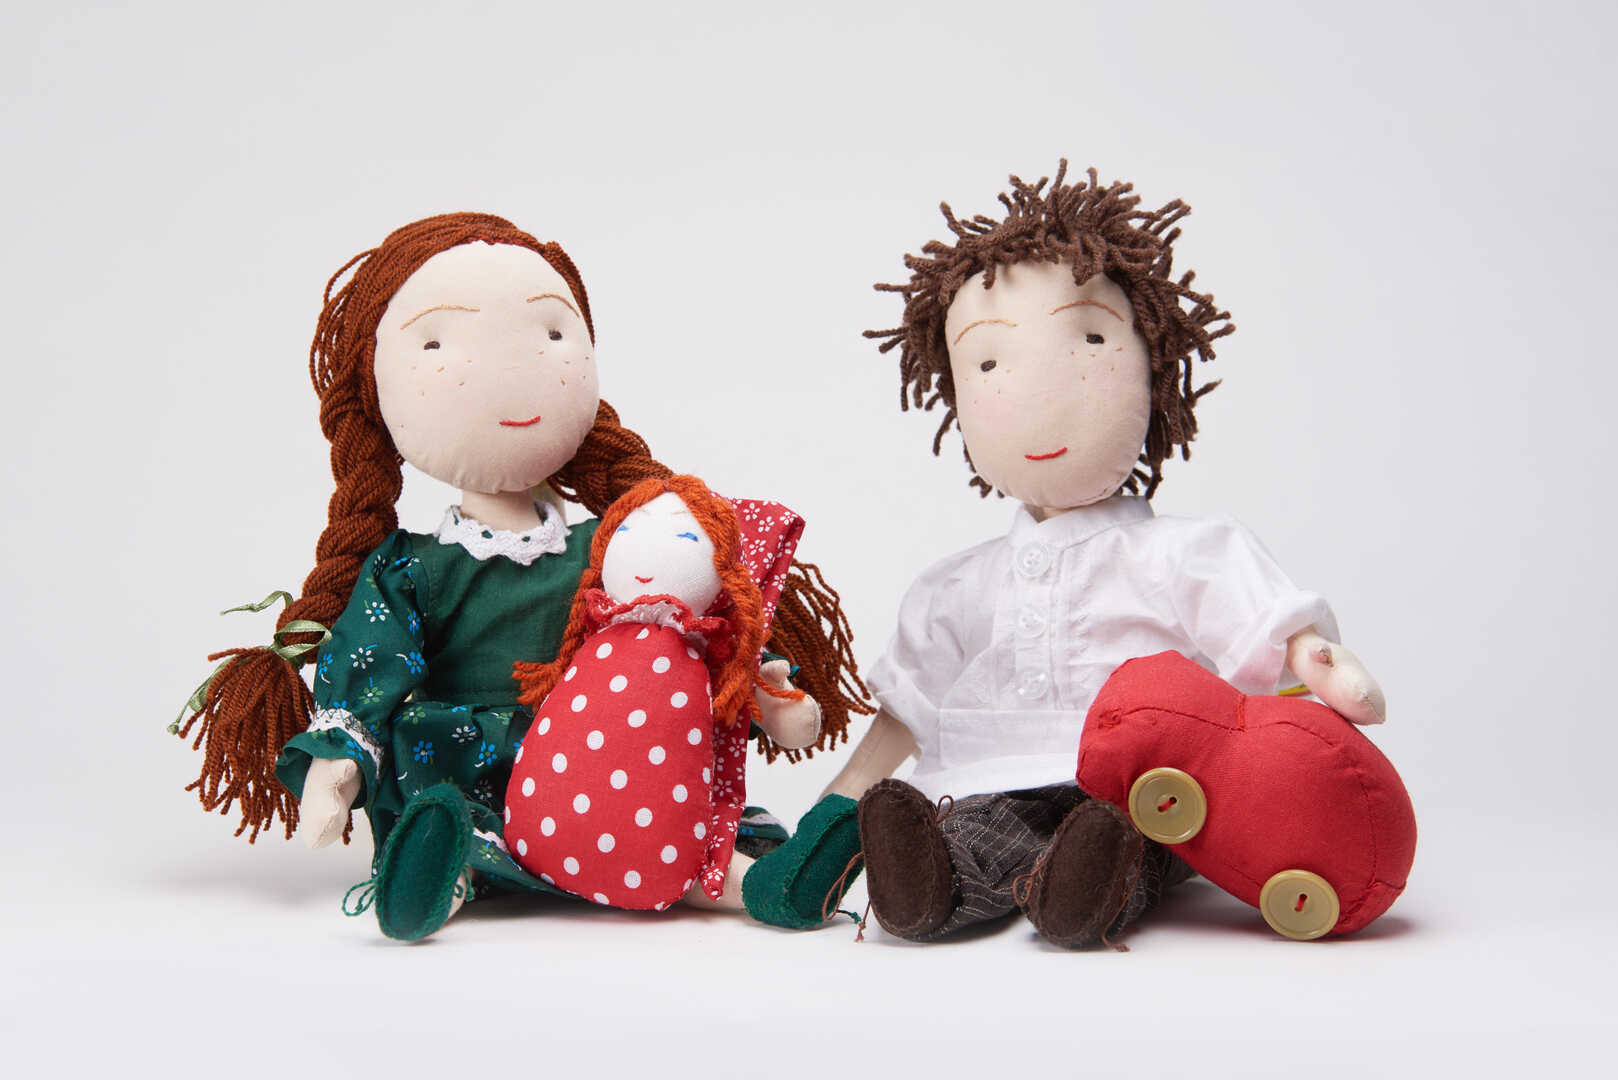 Lili and Marót dolls with their toys